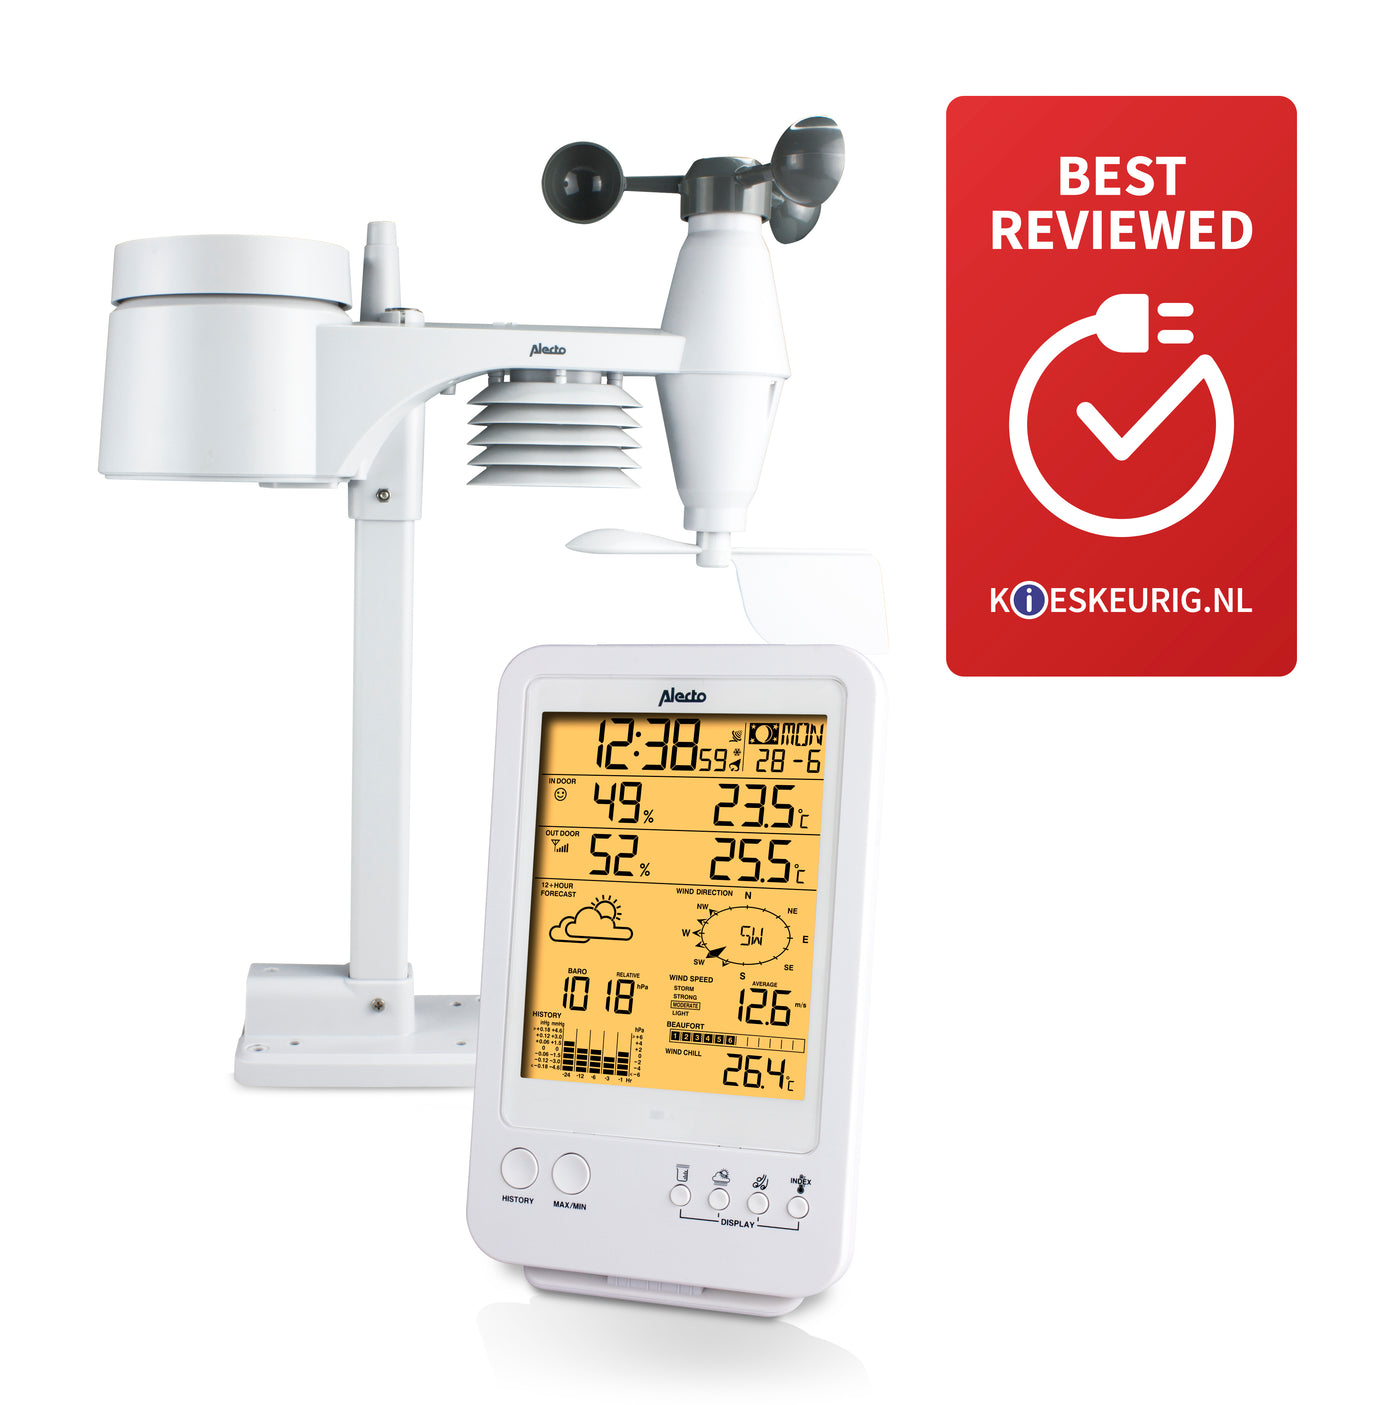 Alecto WS-4800 - Professional weather station with wireless sensor, white